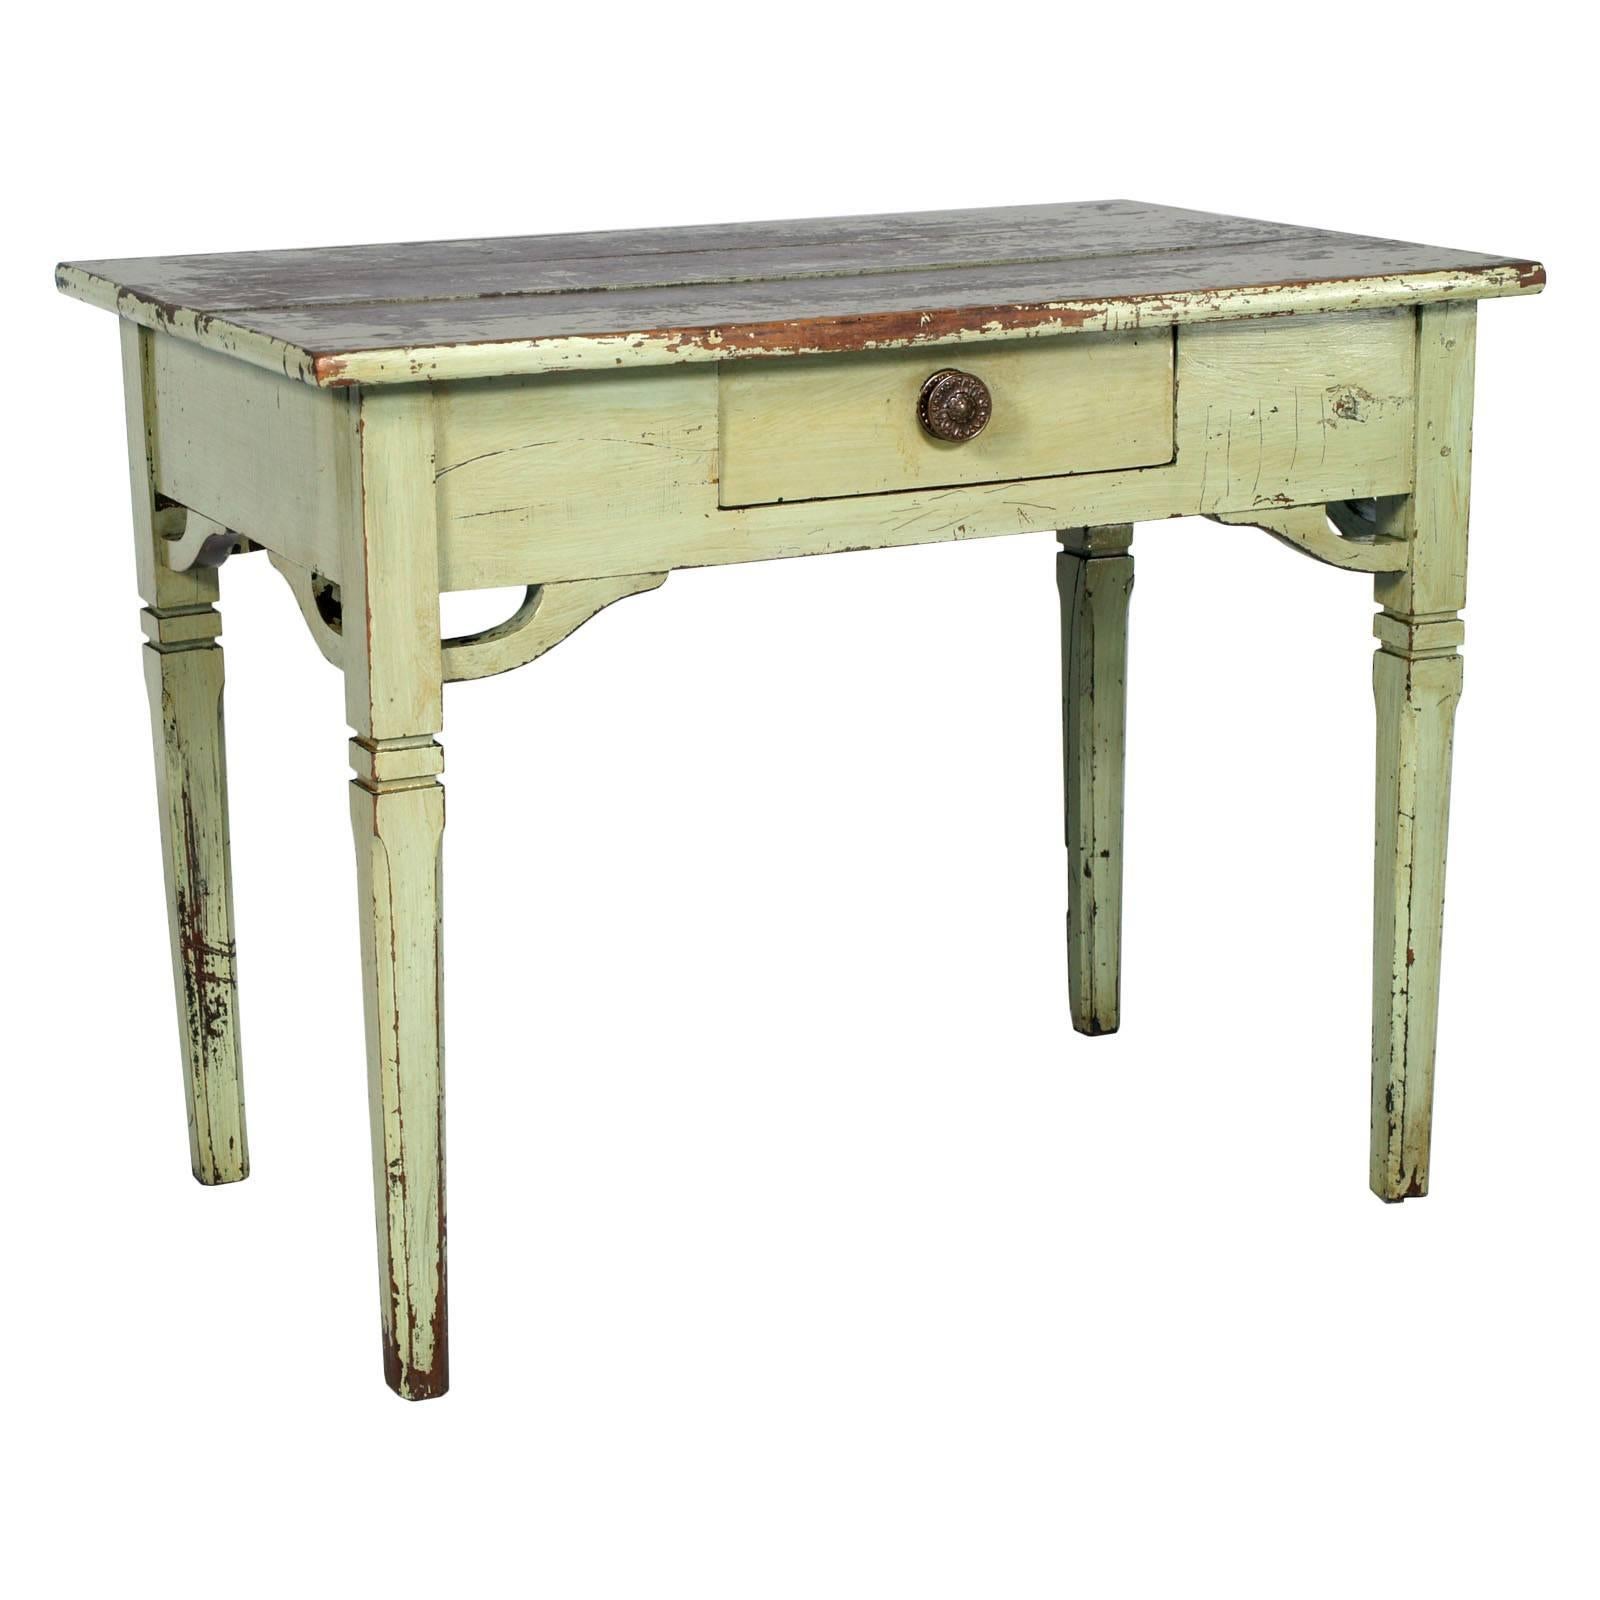 Late 19th Century Tyrolean Shabby Small Desk Table Art Nouveau, Pine Painted